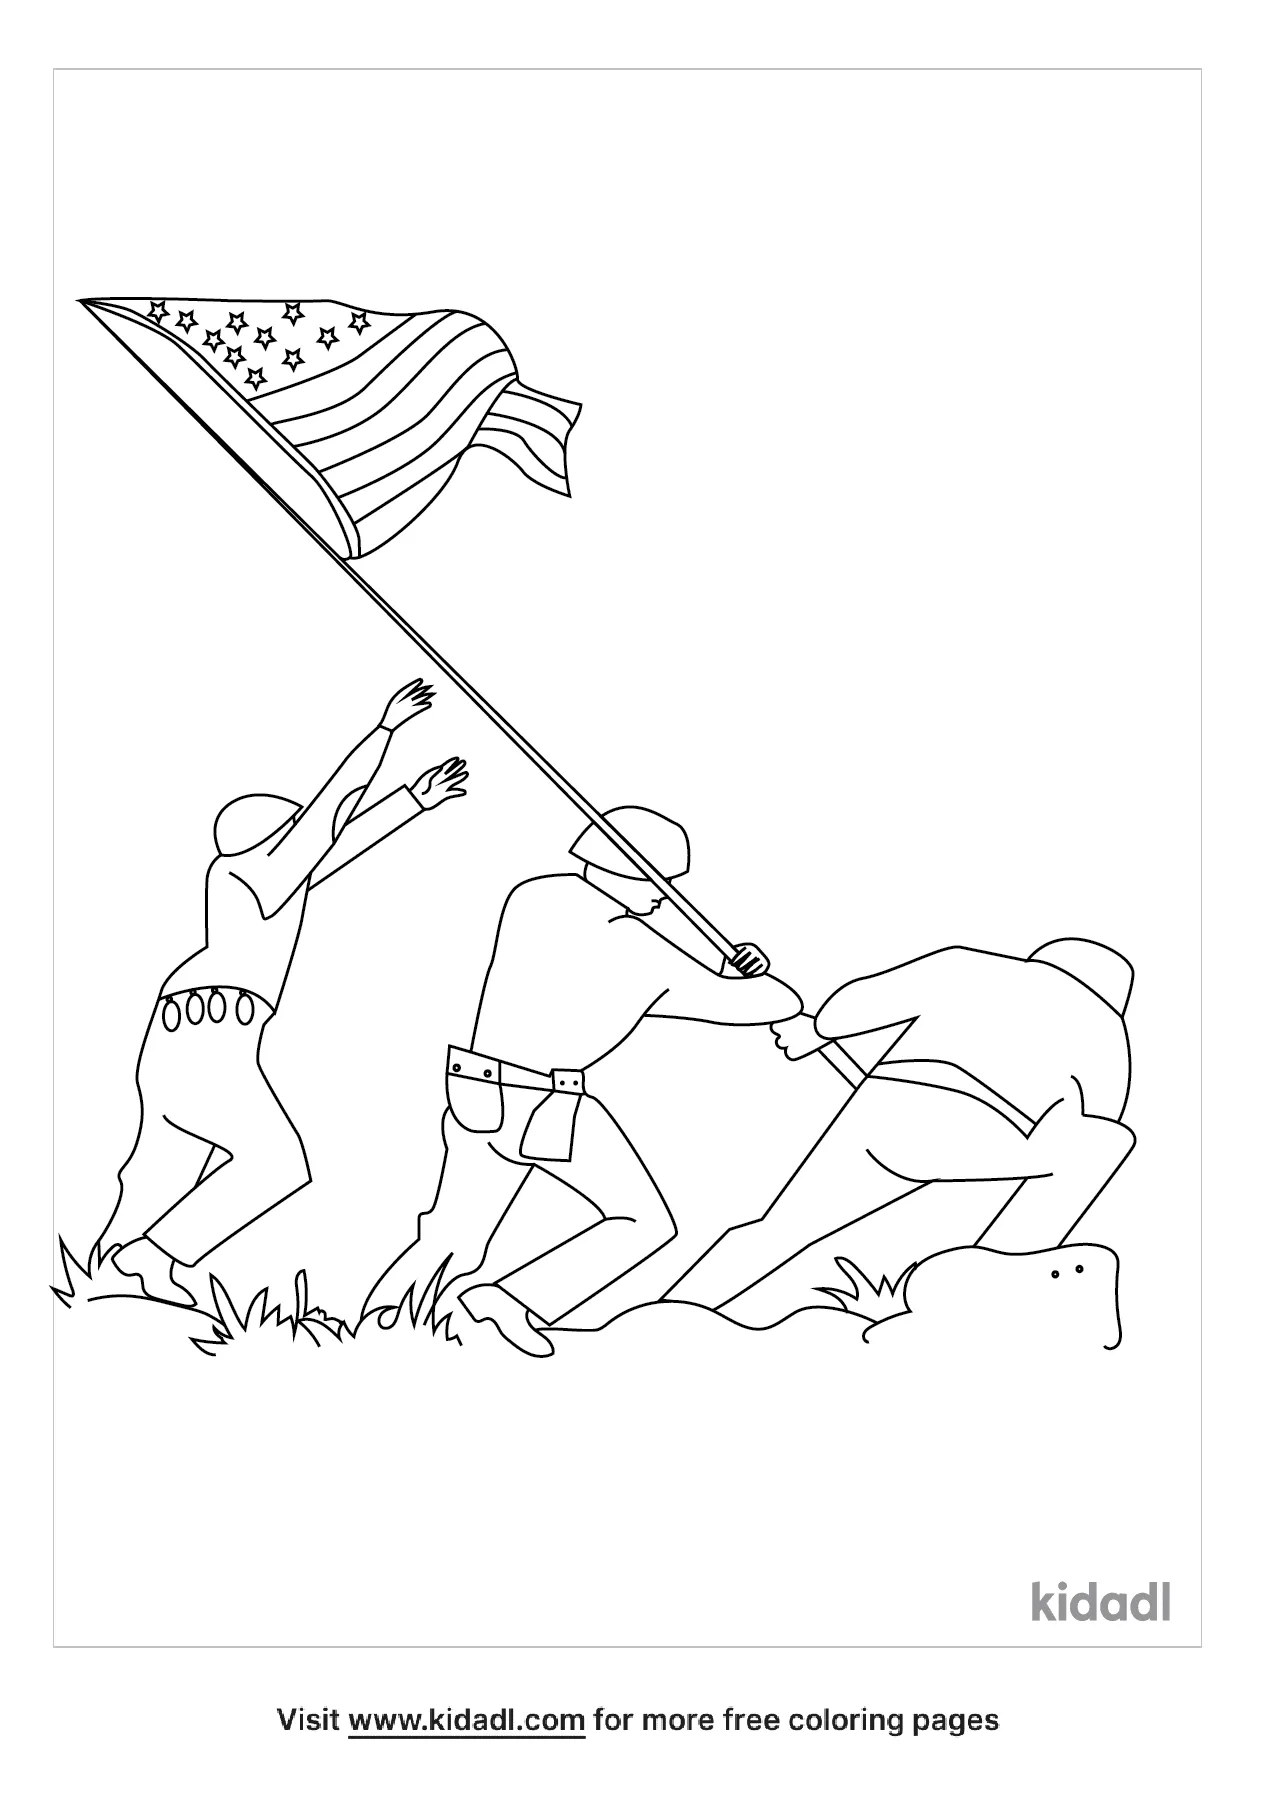 American Ww2 Planes Coloring Pages Coloring Pages - vrogue.co